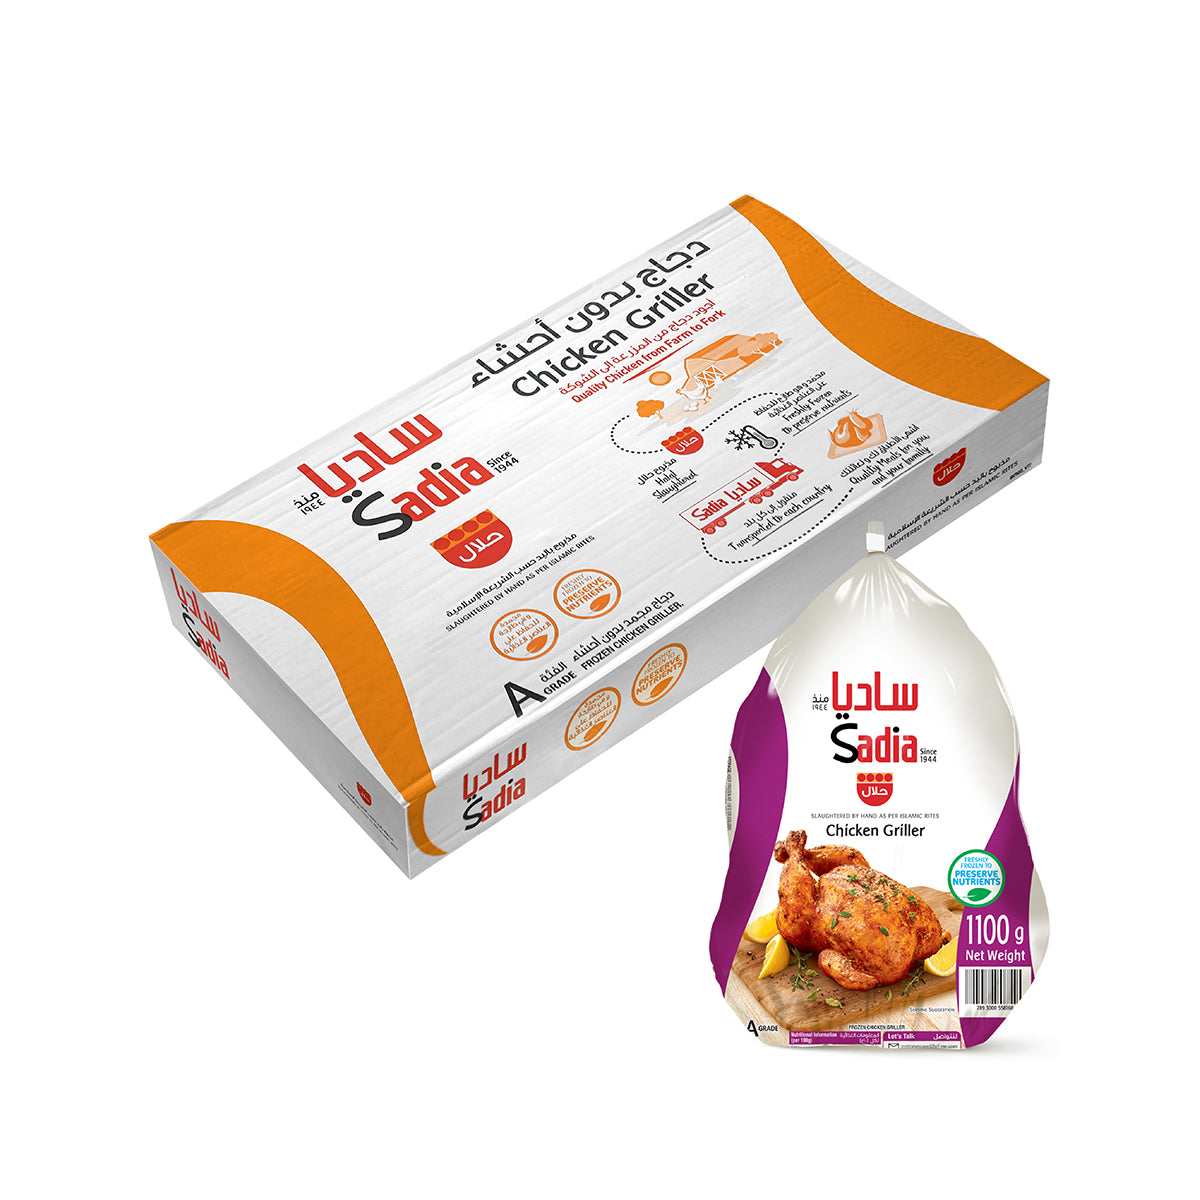 Whole Chicken Griller 1100g - Sadia